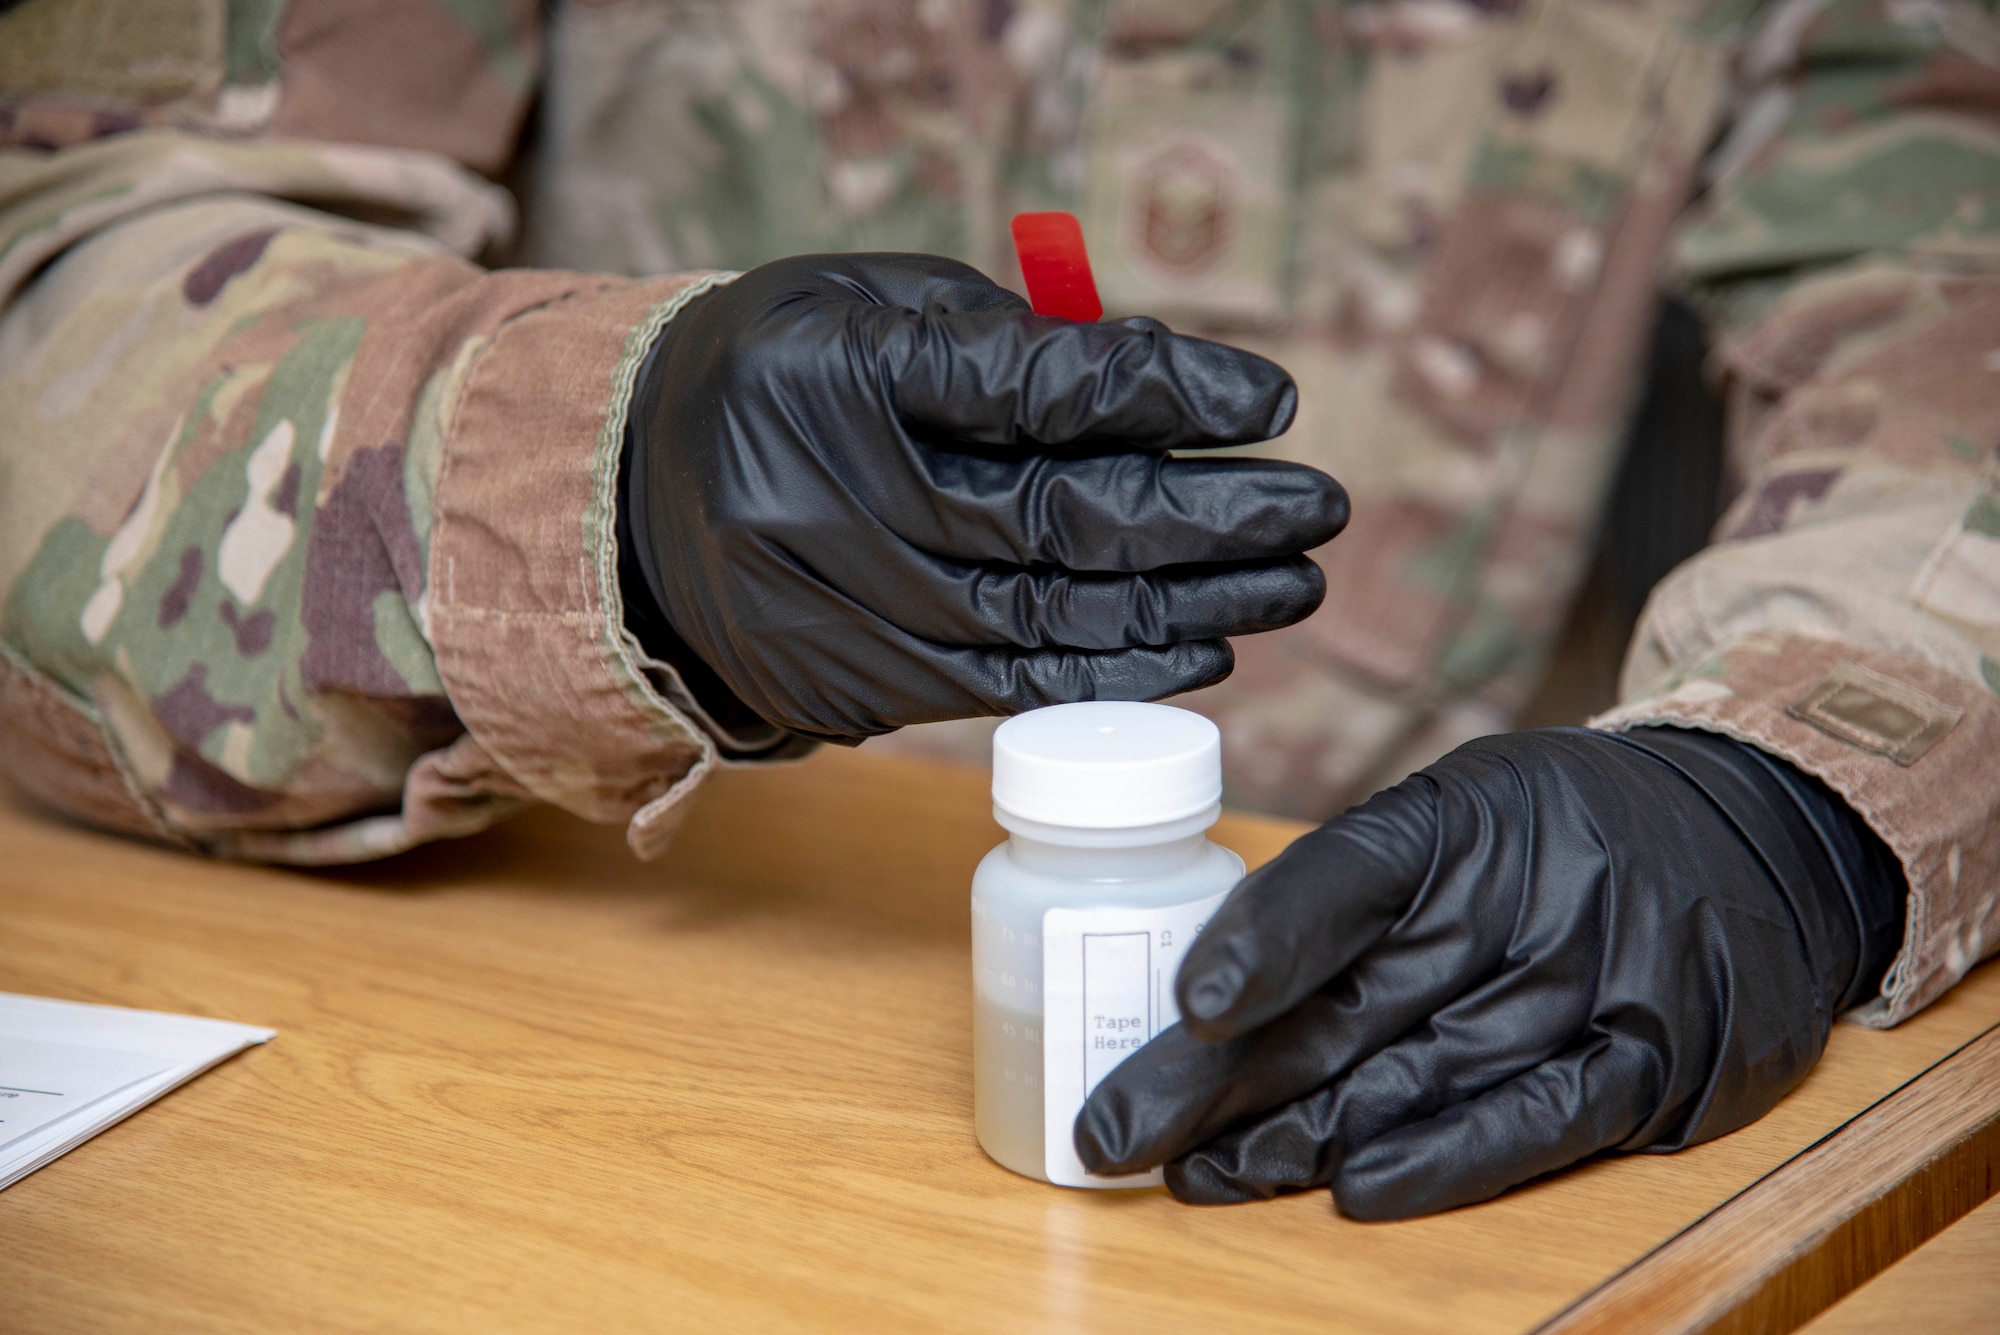 Master Sgt. Jason Maldonado, 436th Air Wing Drug Demand Reduction Program collector, seals a urine sample in the bottle November 8, 2019.  The samples are then inspected and packed before being shipped out to be tested at the Forensic Toxicology Drug Testing Laboratory at Lackland AFB, Texas, for any potential drugs. (U.S. Air Force photo by Staff Sgt. Nicole Leidholm)